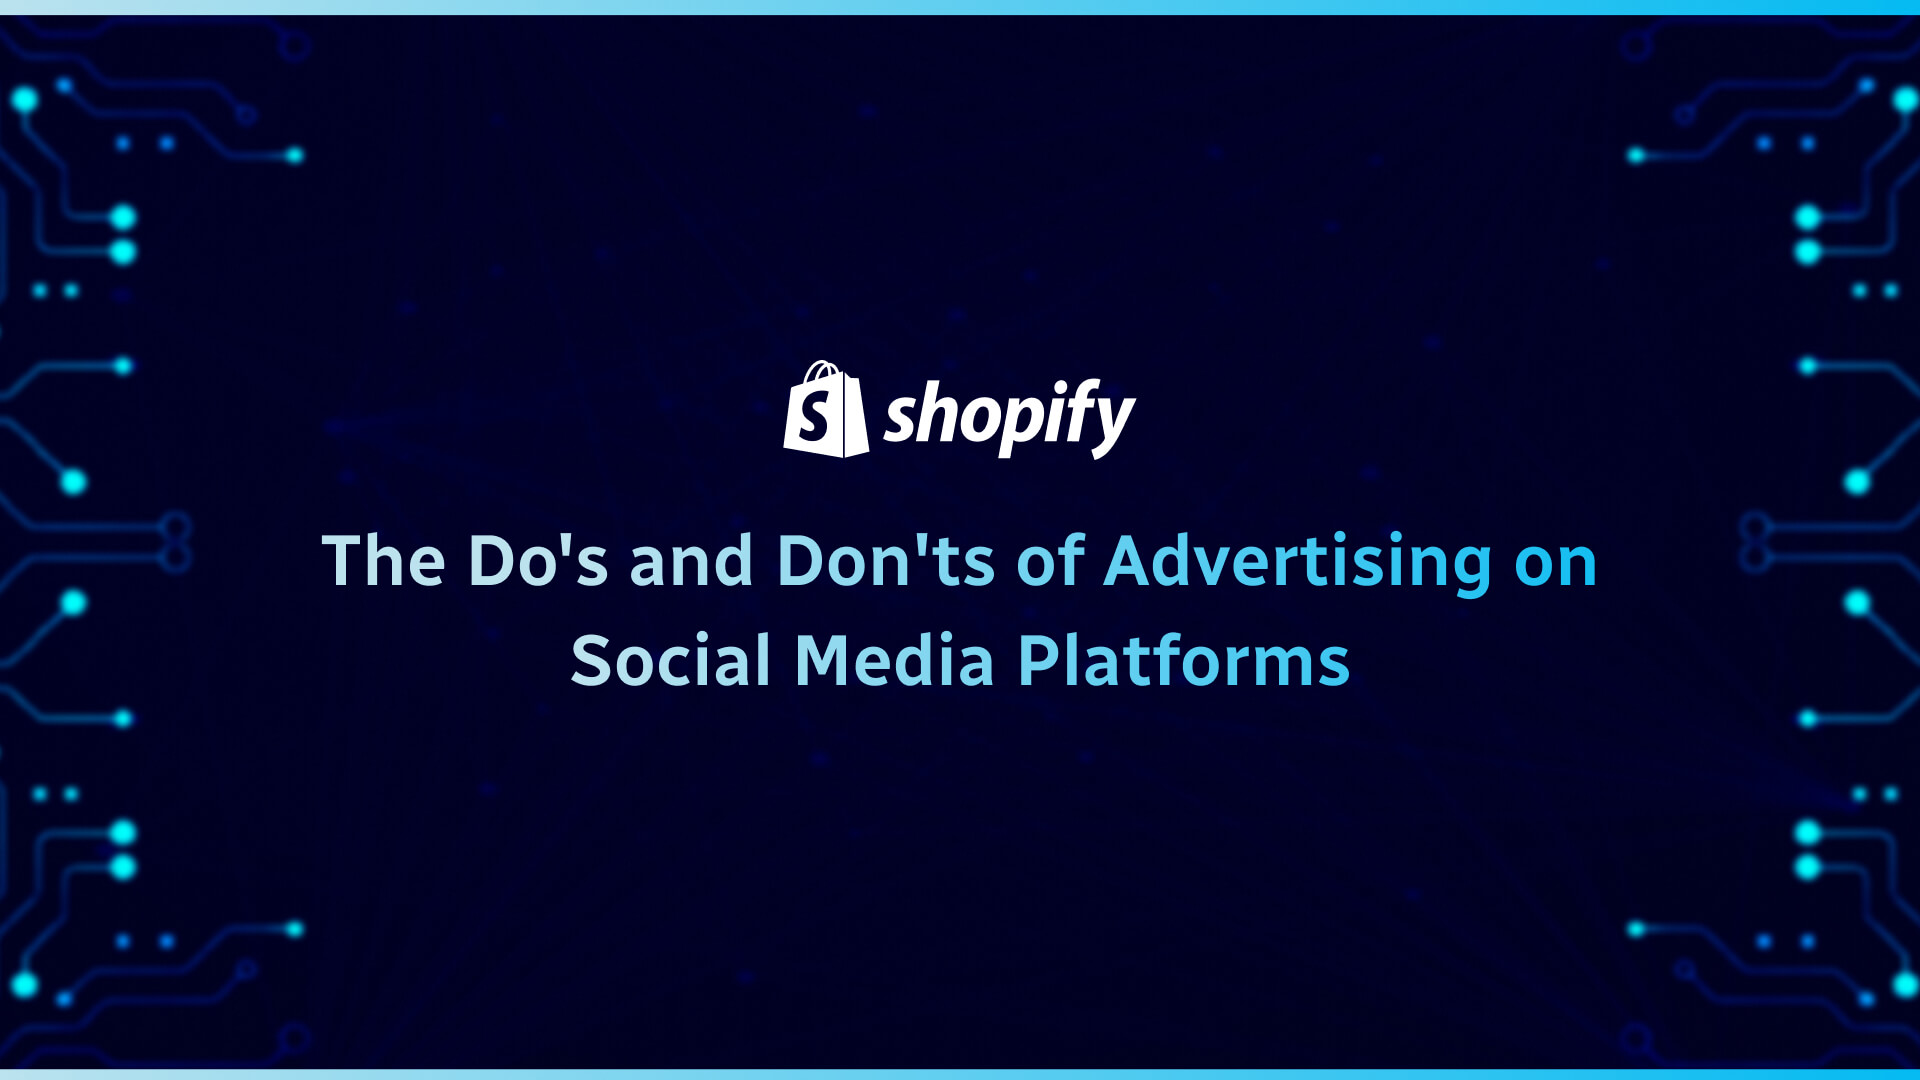 The Do’s and Don’ts of Advertising on Social Media Platforms